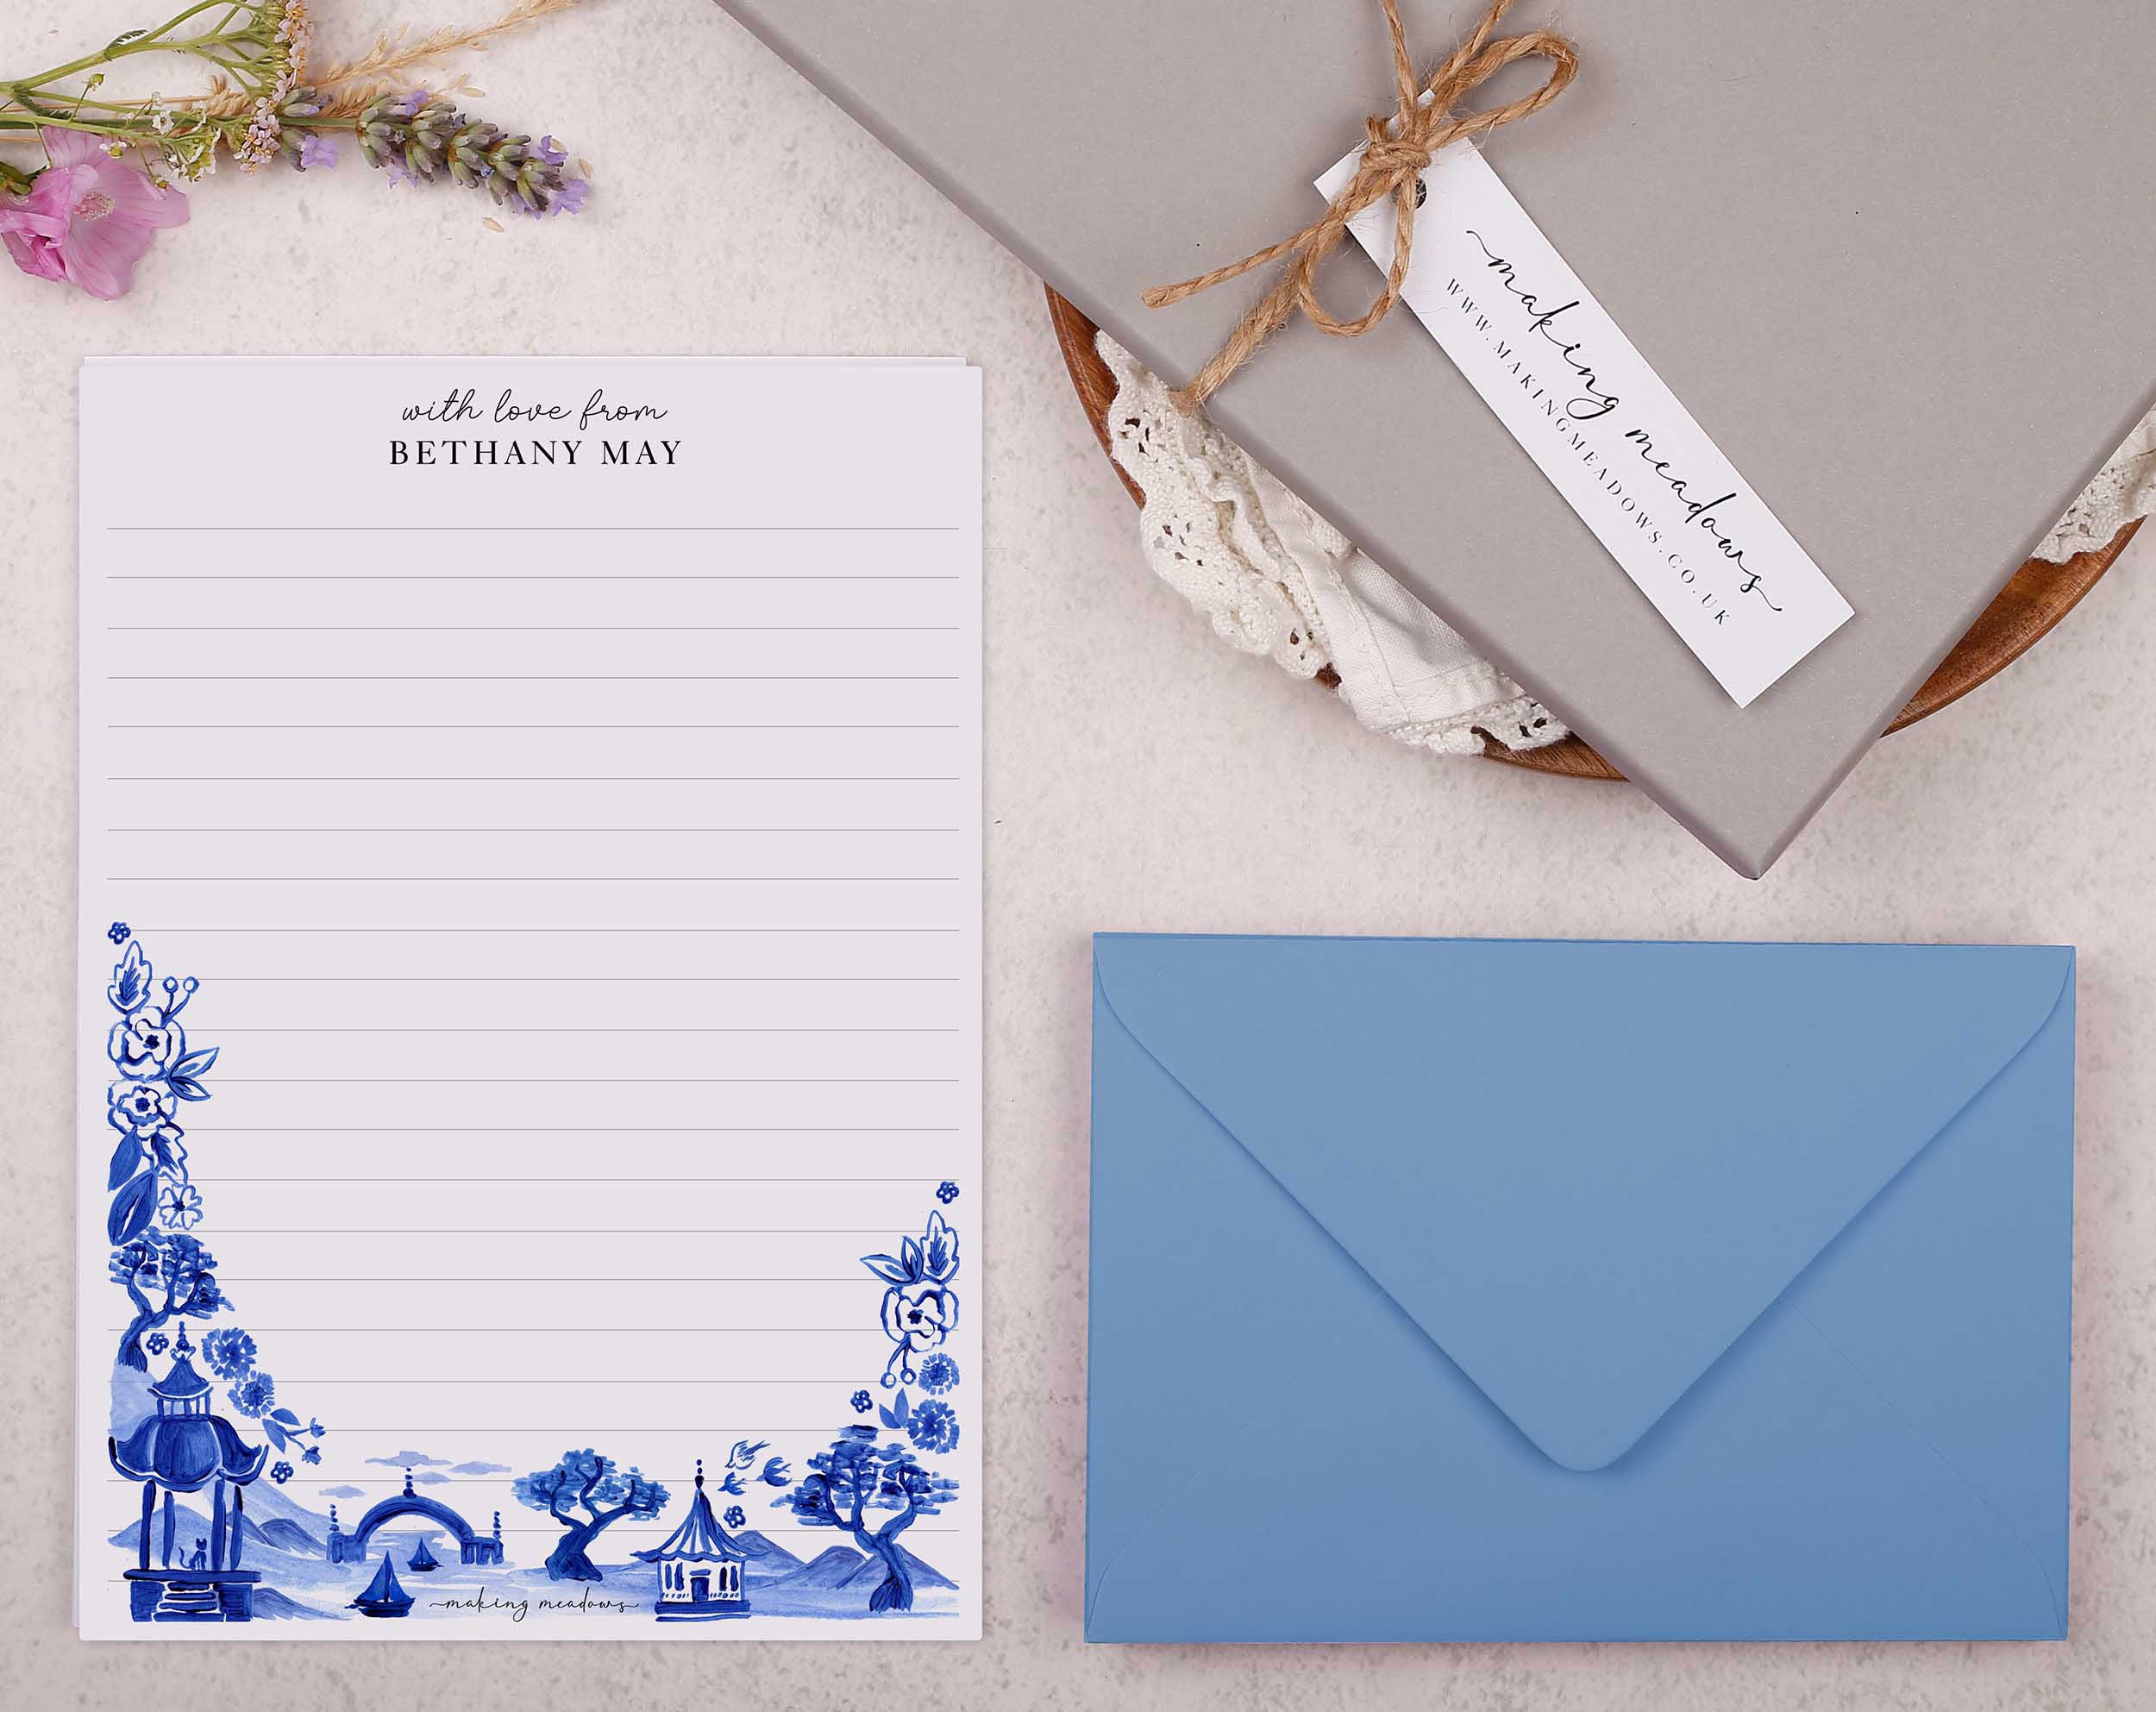 Premium personalised A5 letter writing paper set with a hand painted watercolour oriental landscape in a china blue porcelain design.